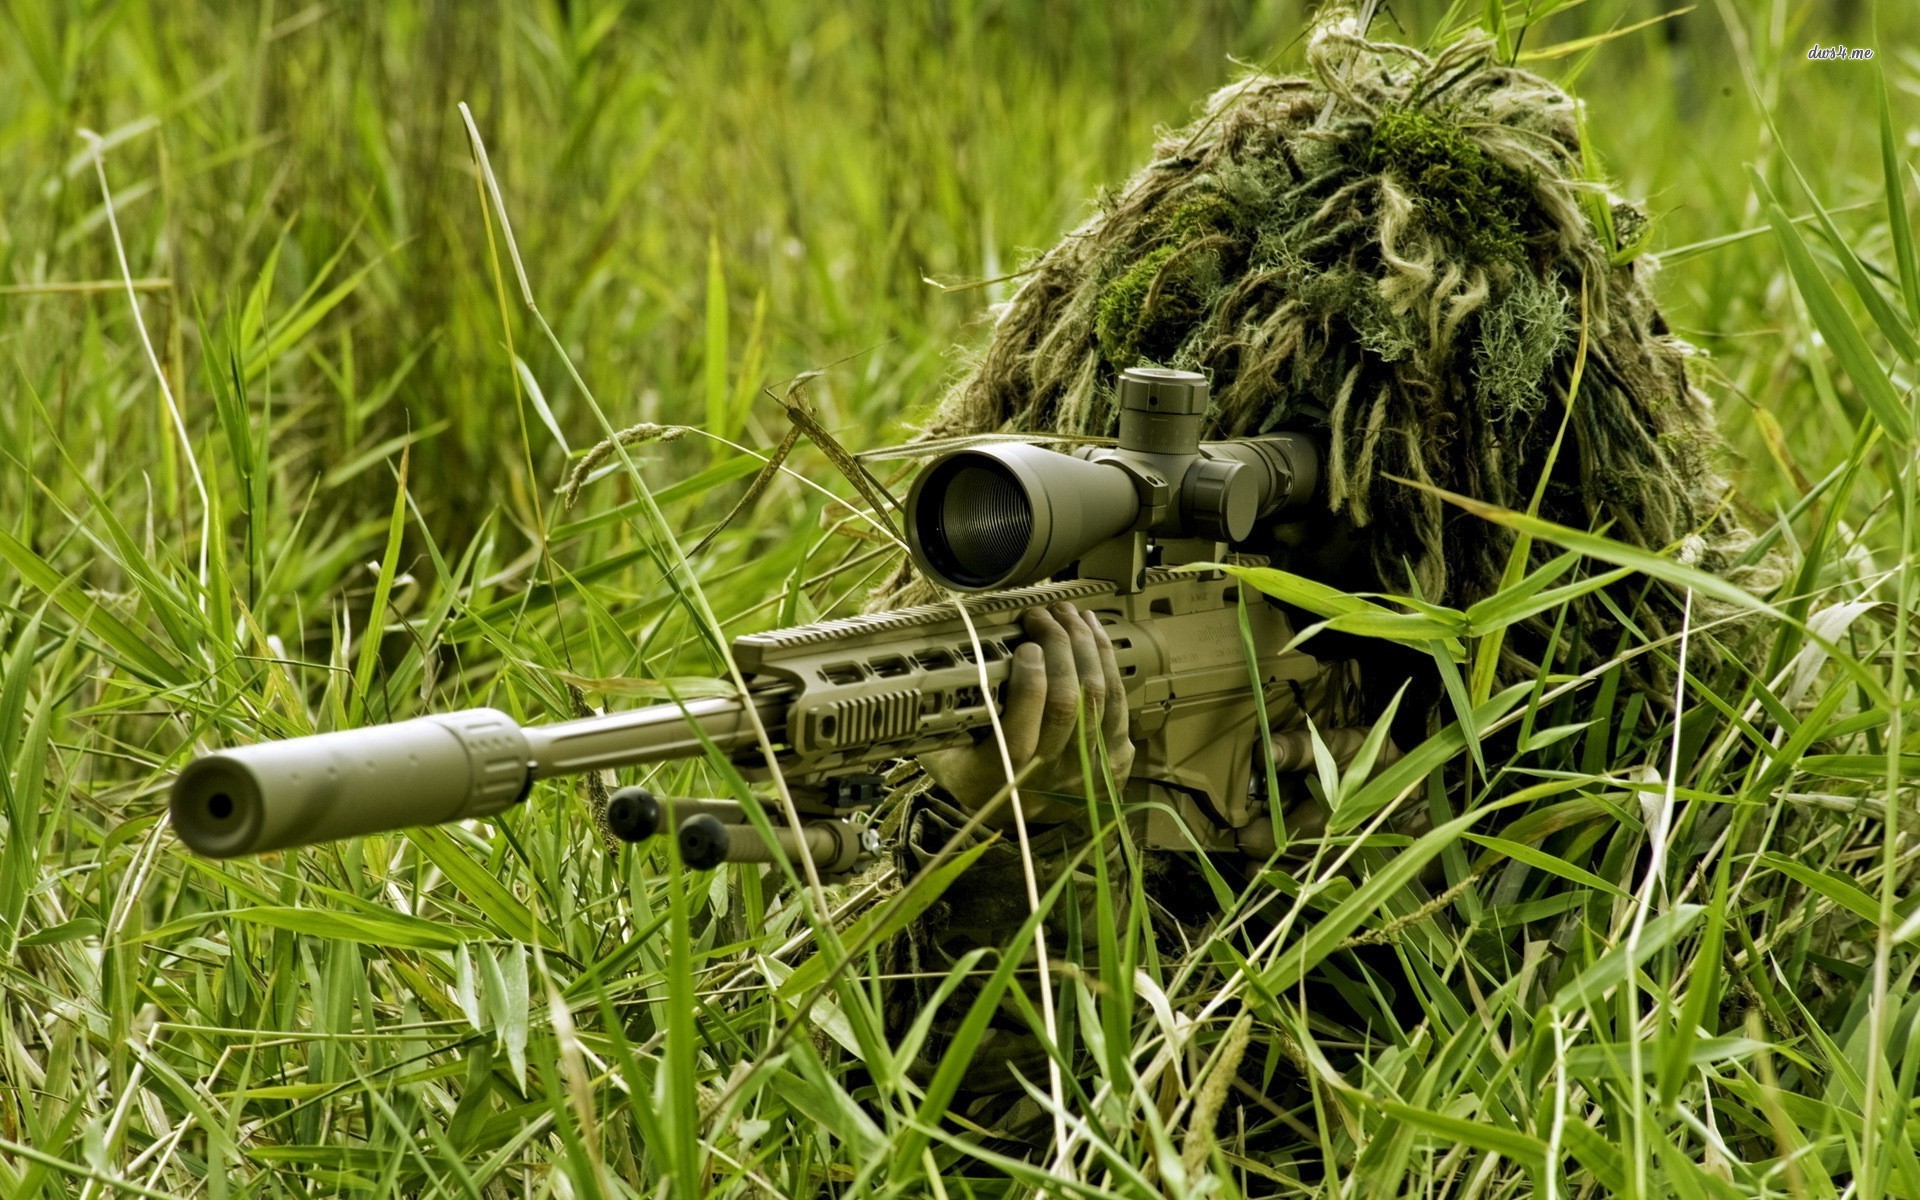 Camouflaged Sniper wallpapers HD free   436148